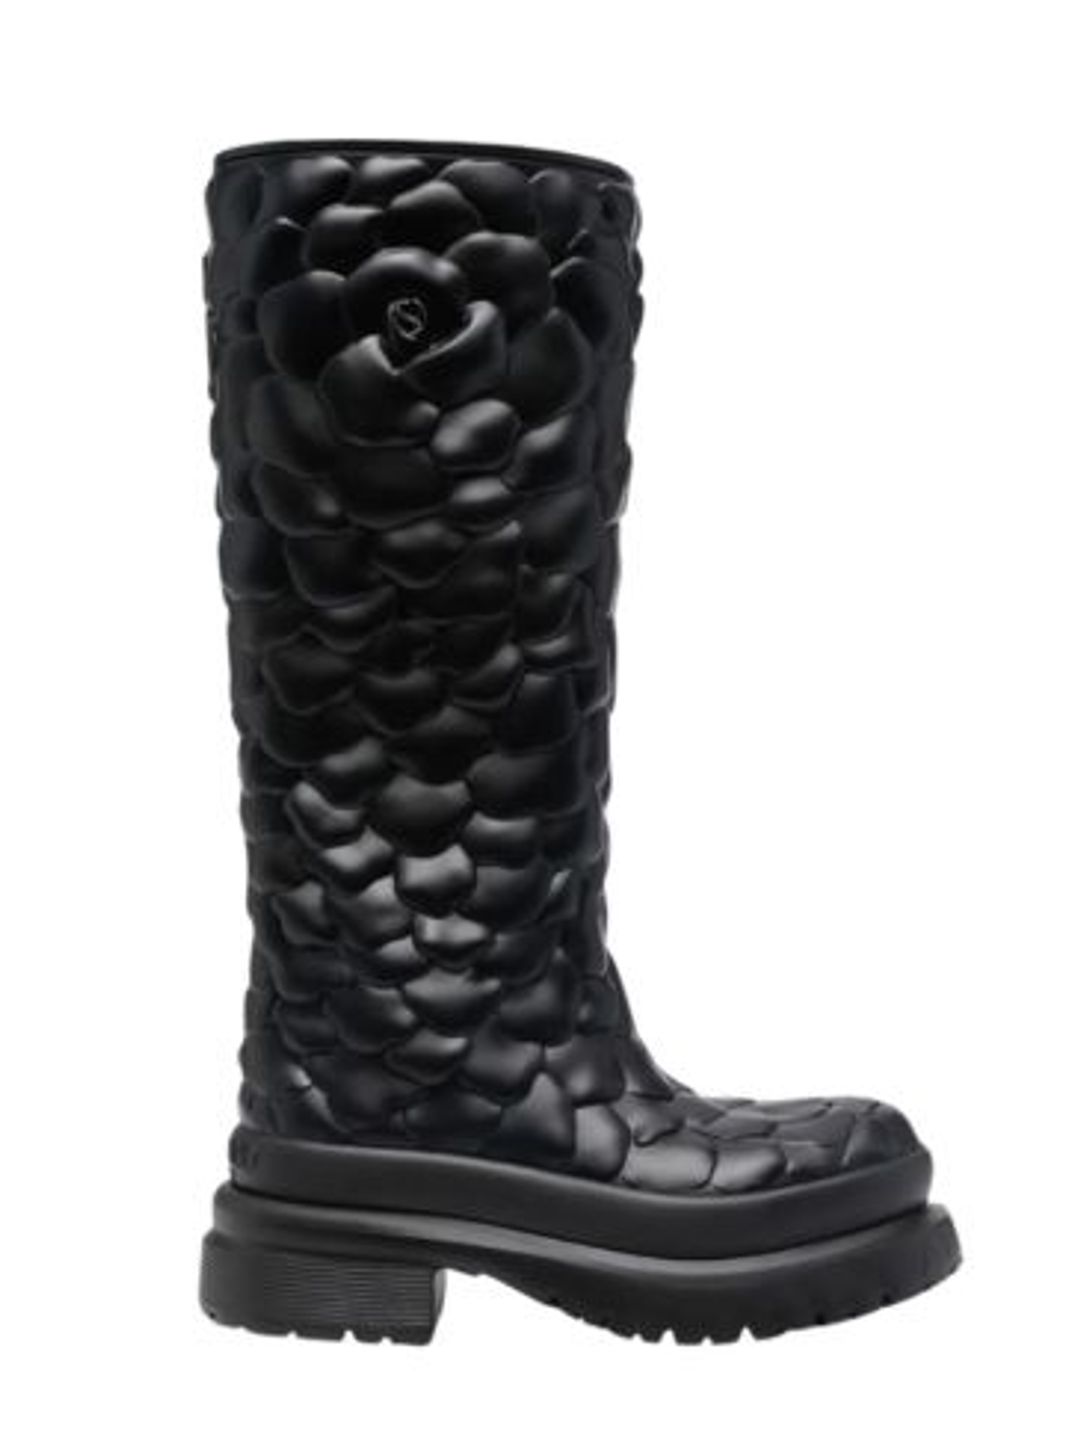 Valentino Atelier floral-embossed mid-calf rain boots